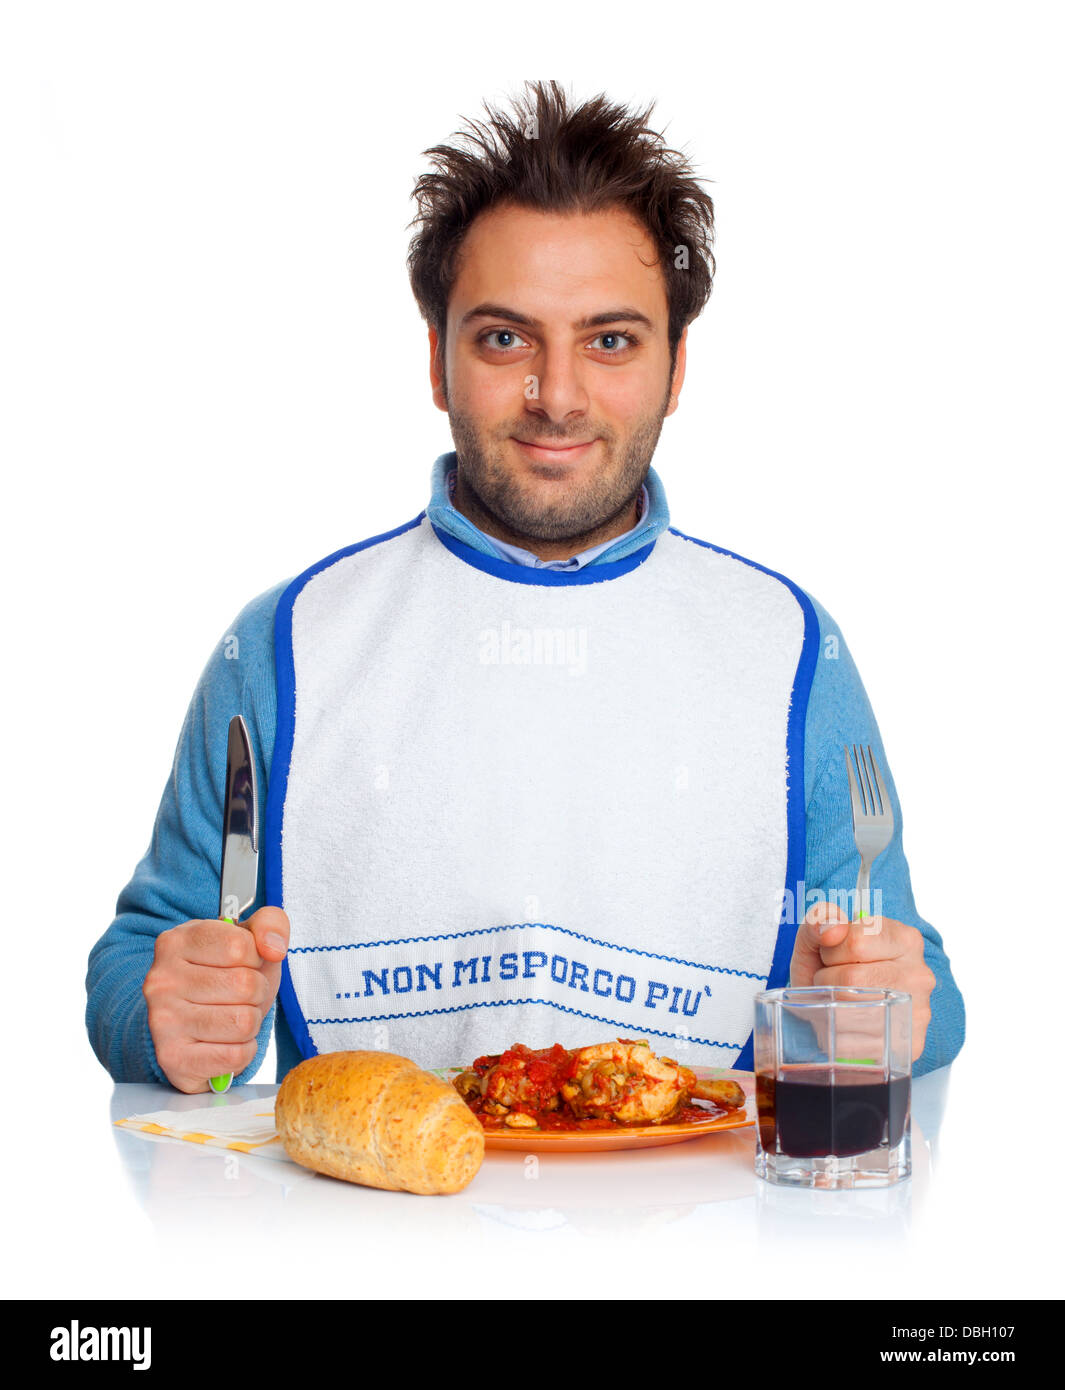 Guy With Bib At The Dinner Table Stock Photo Alamy